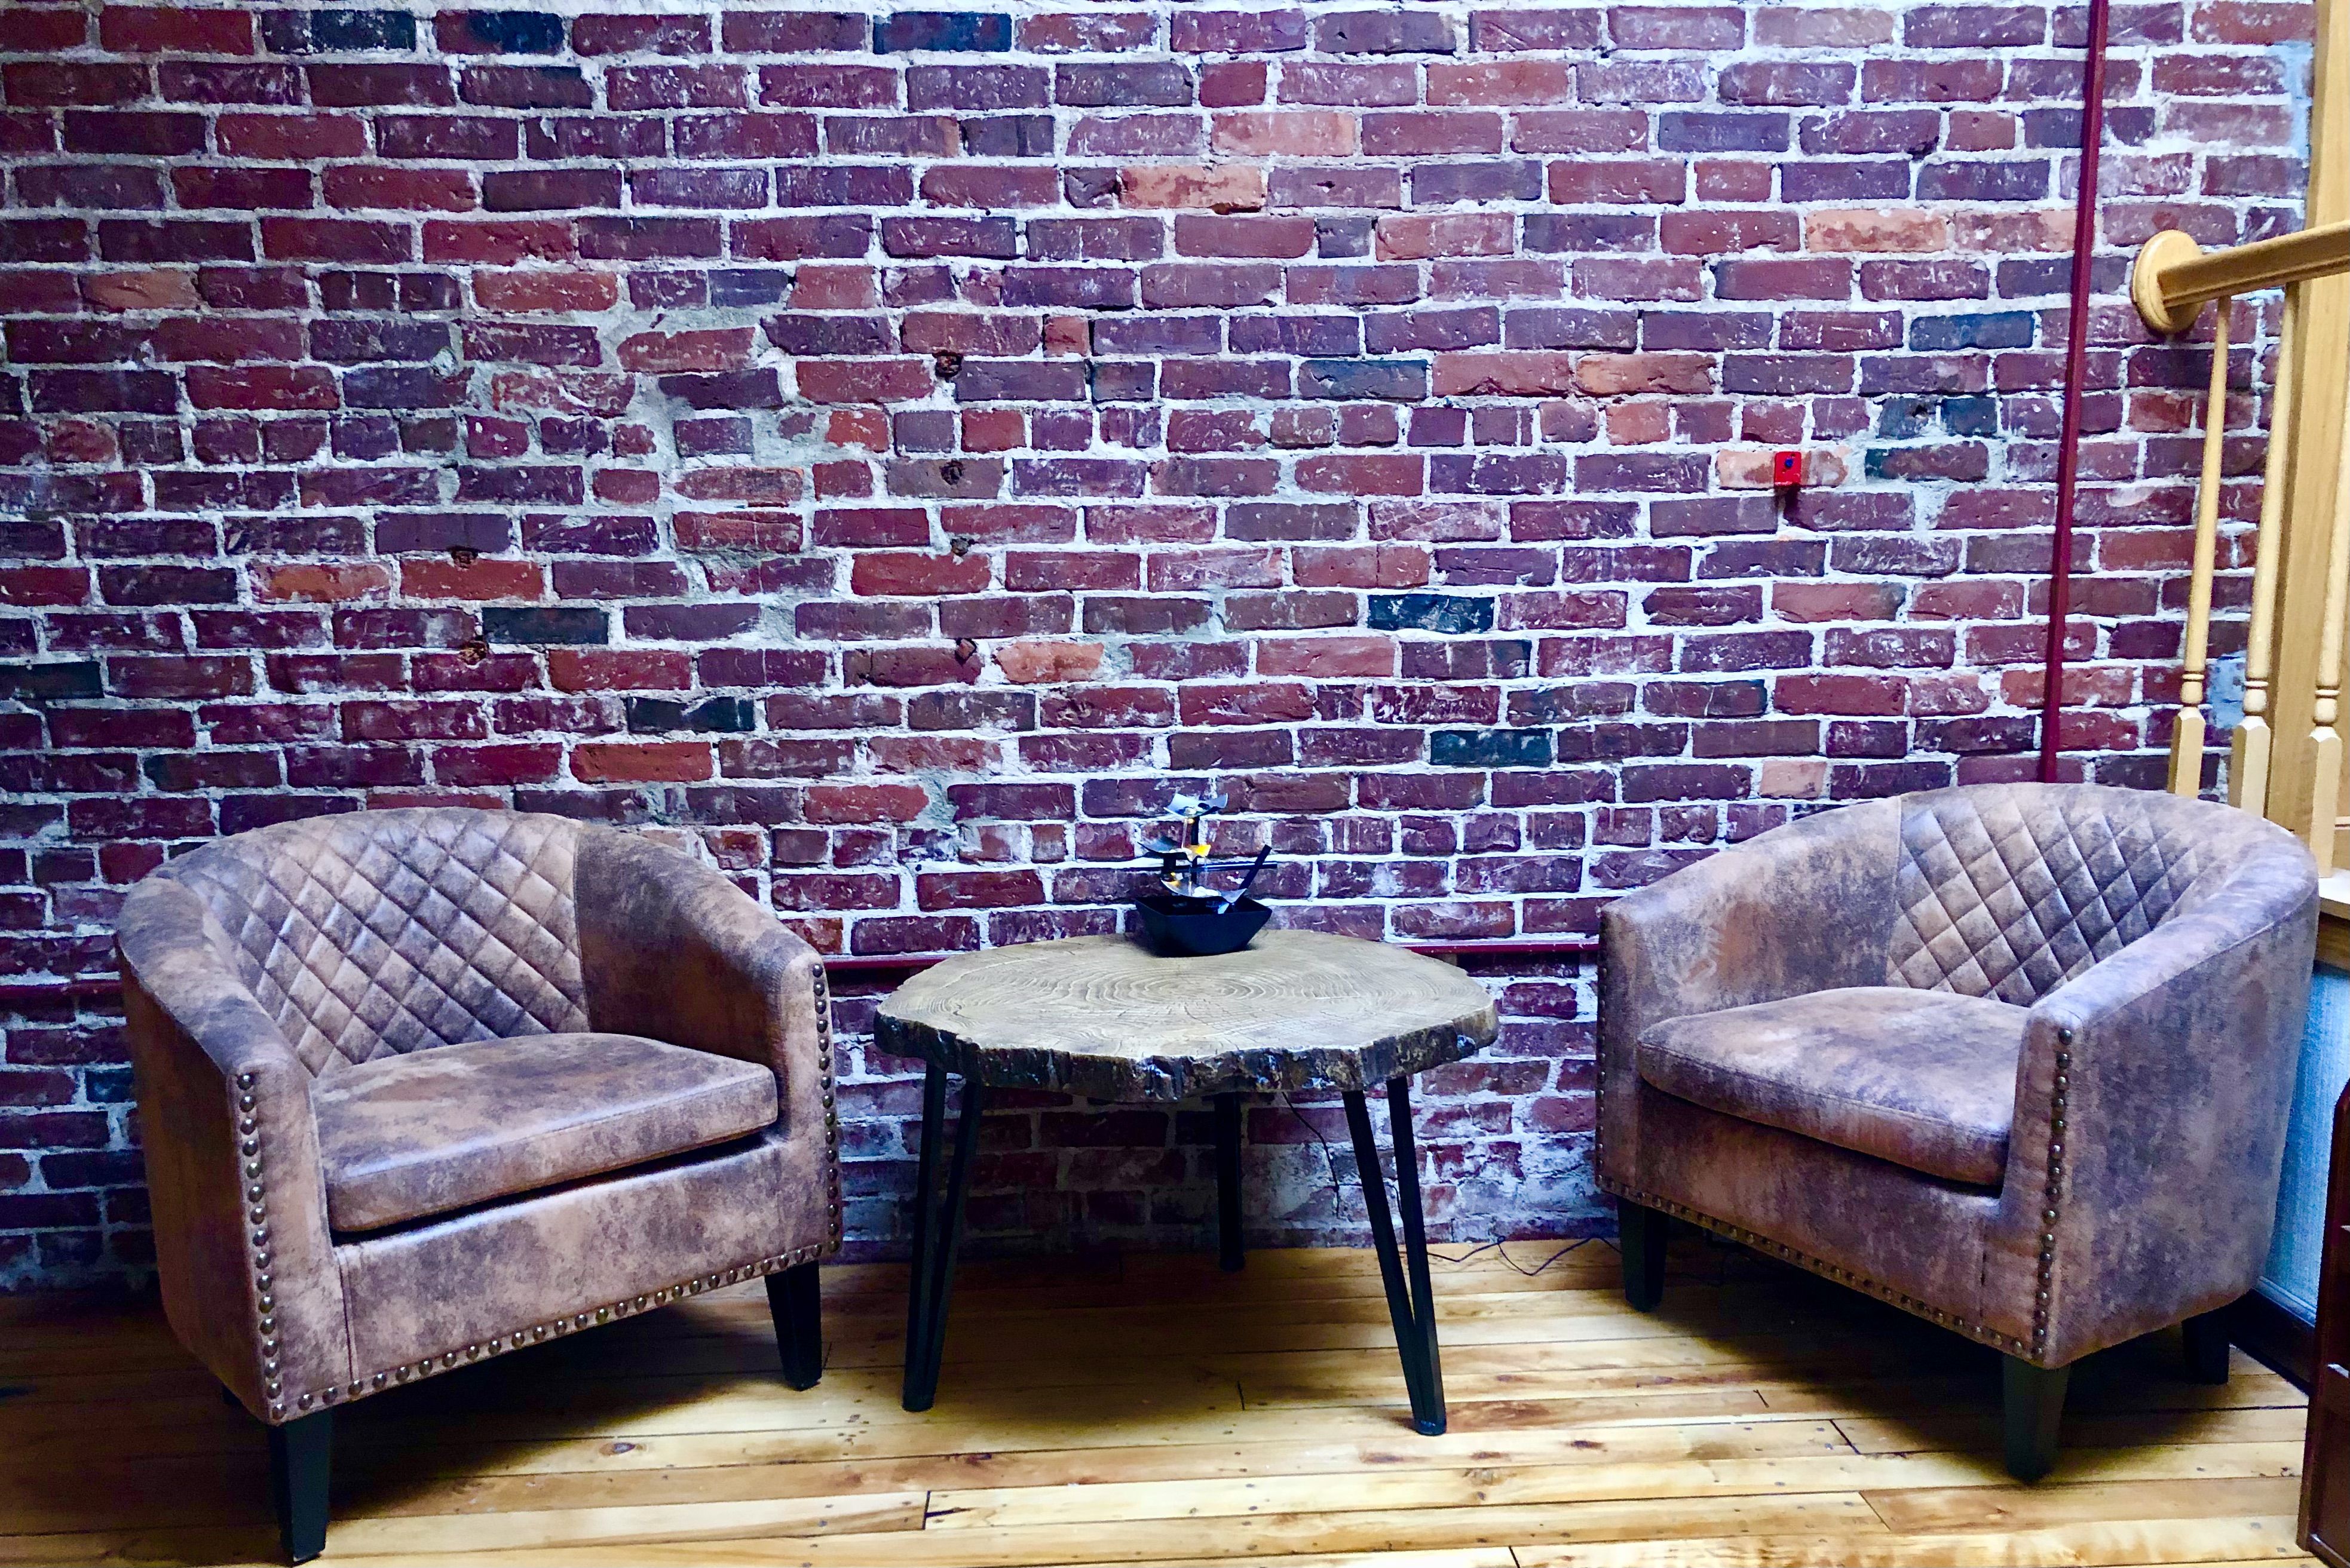 Two brown leather chairs in front of brick wall